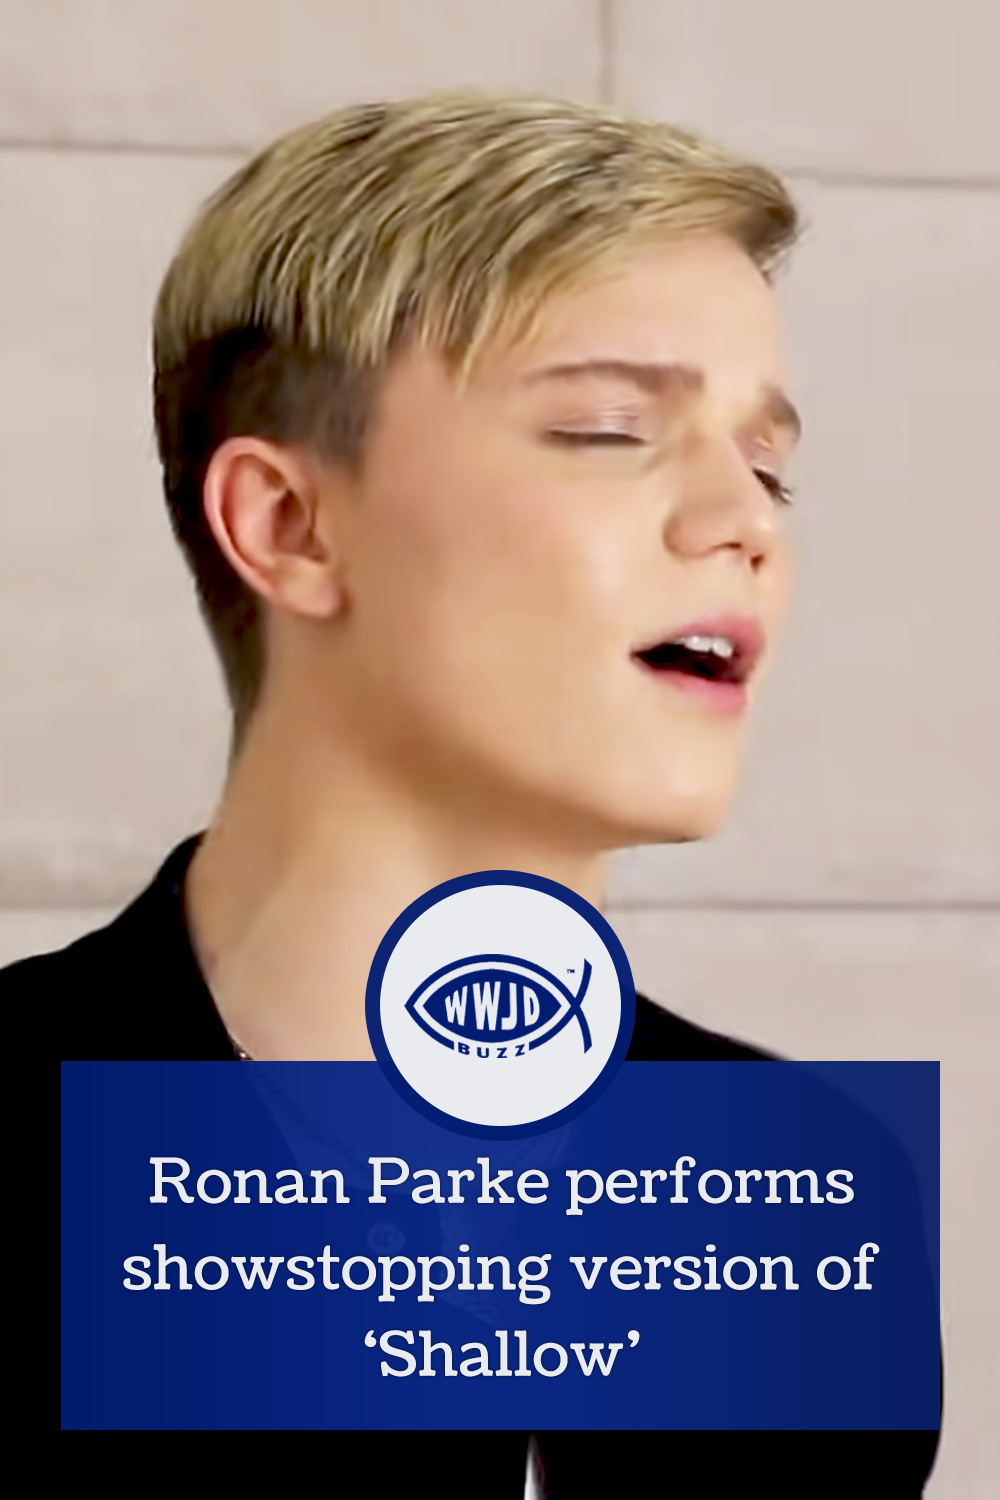 Ronan Parke performs showstopping version of ‘Shallow’